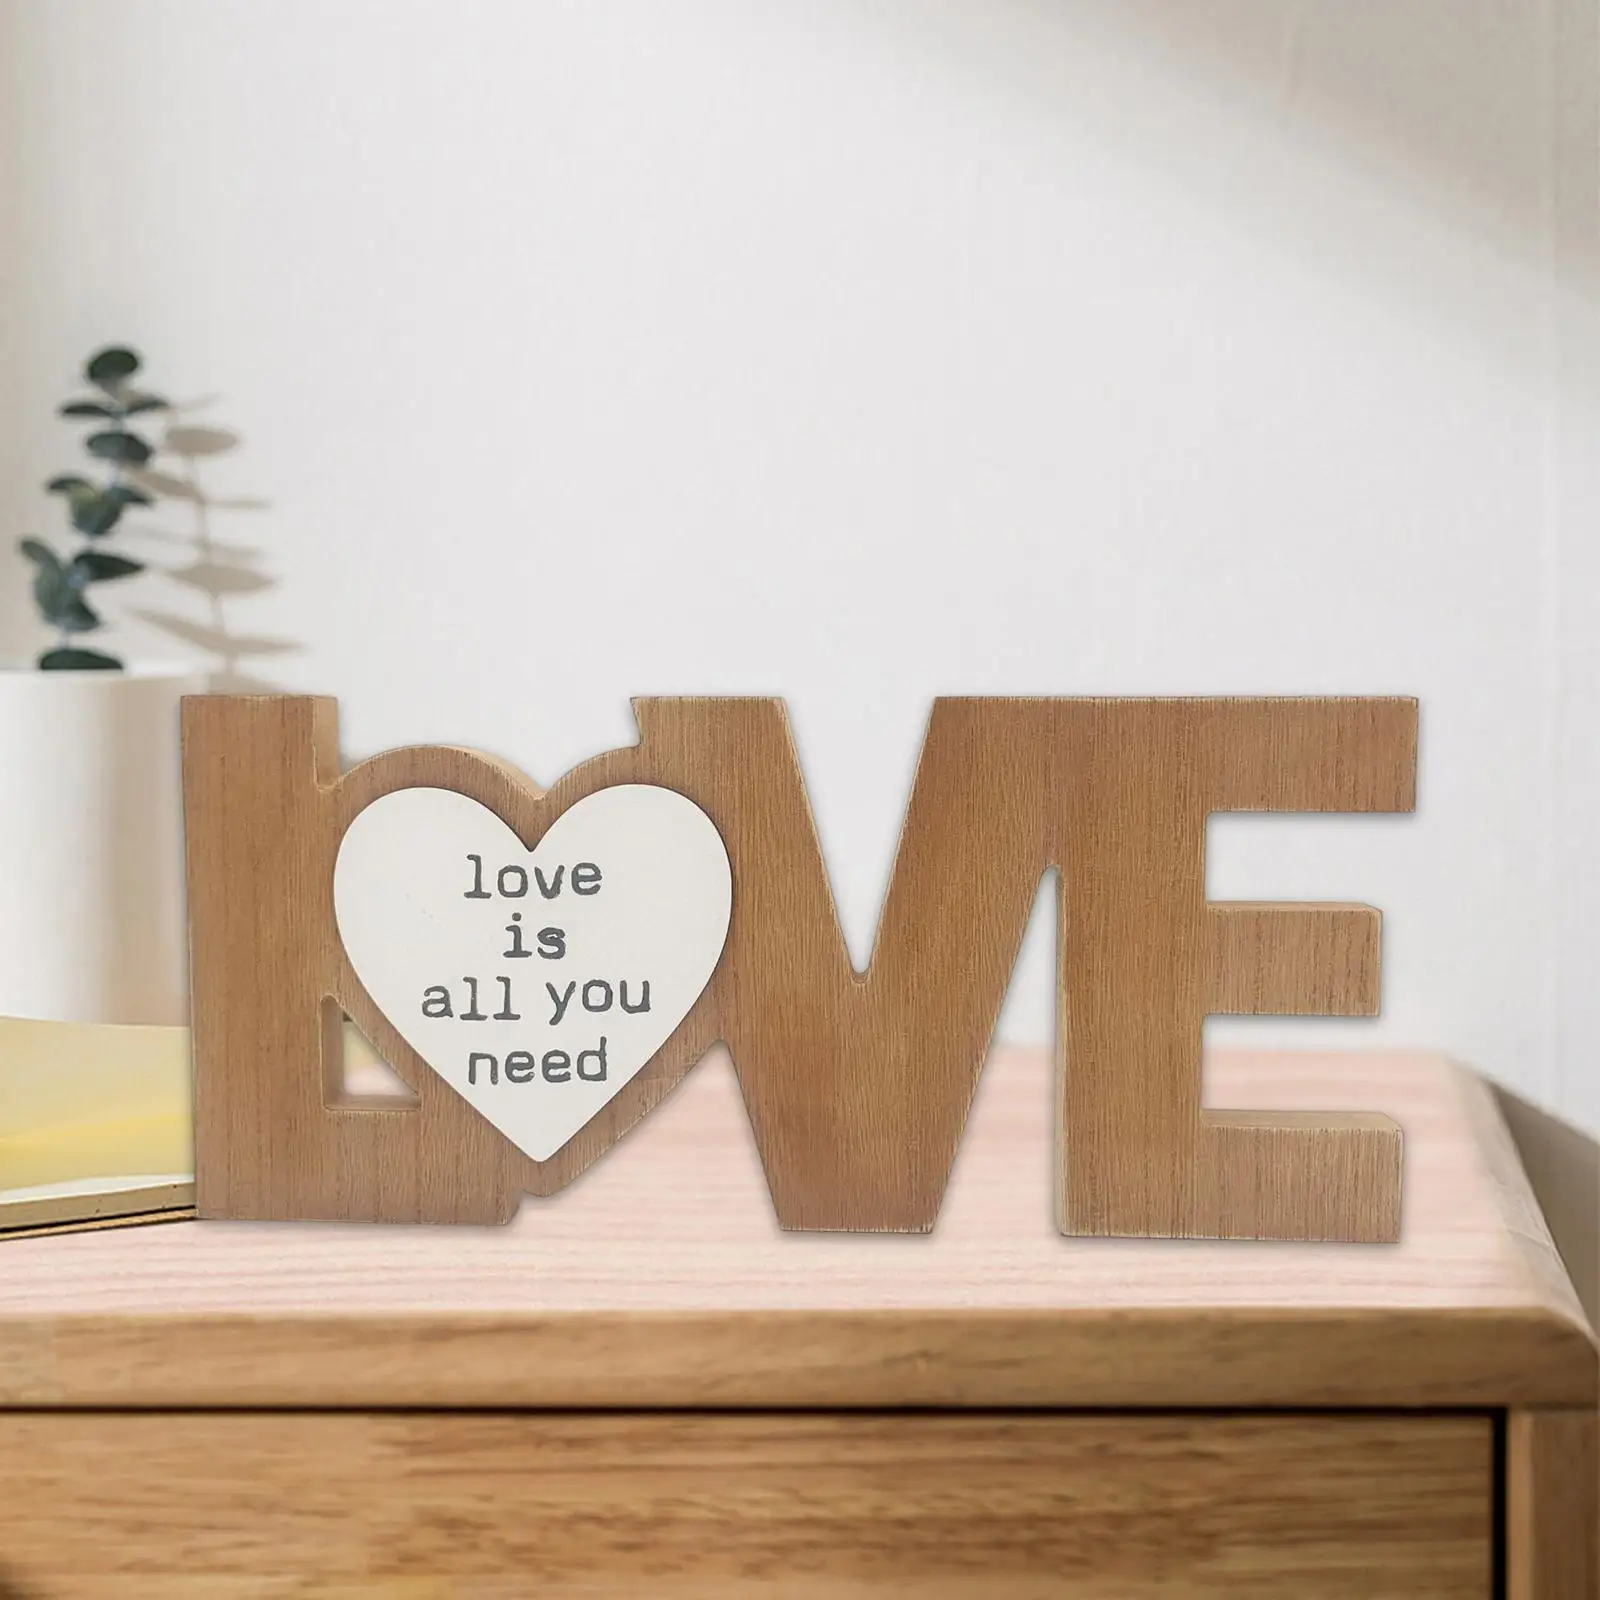 Wood Cutout Love Letters Sign Wedding Ornaments Accessory Housewarming Gift